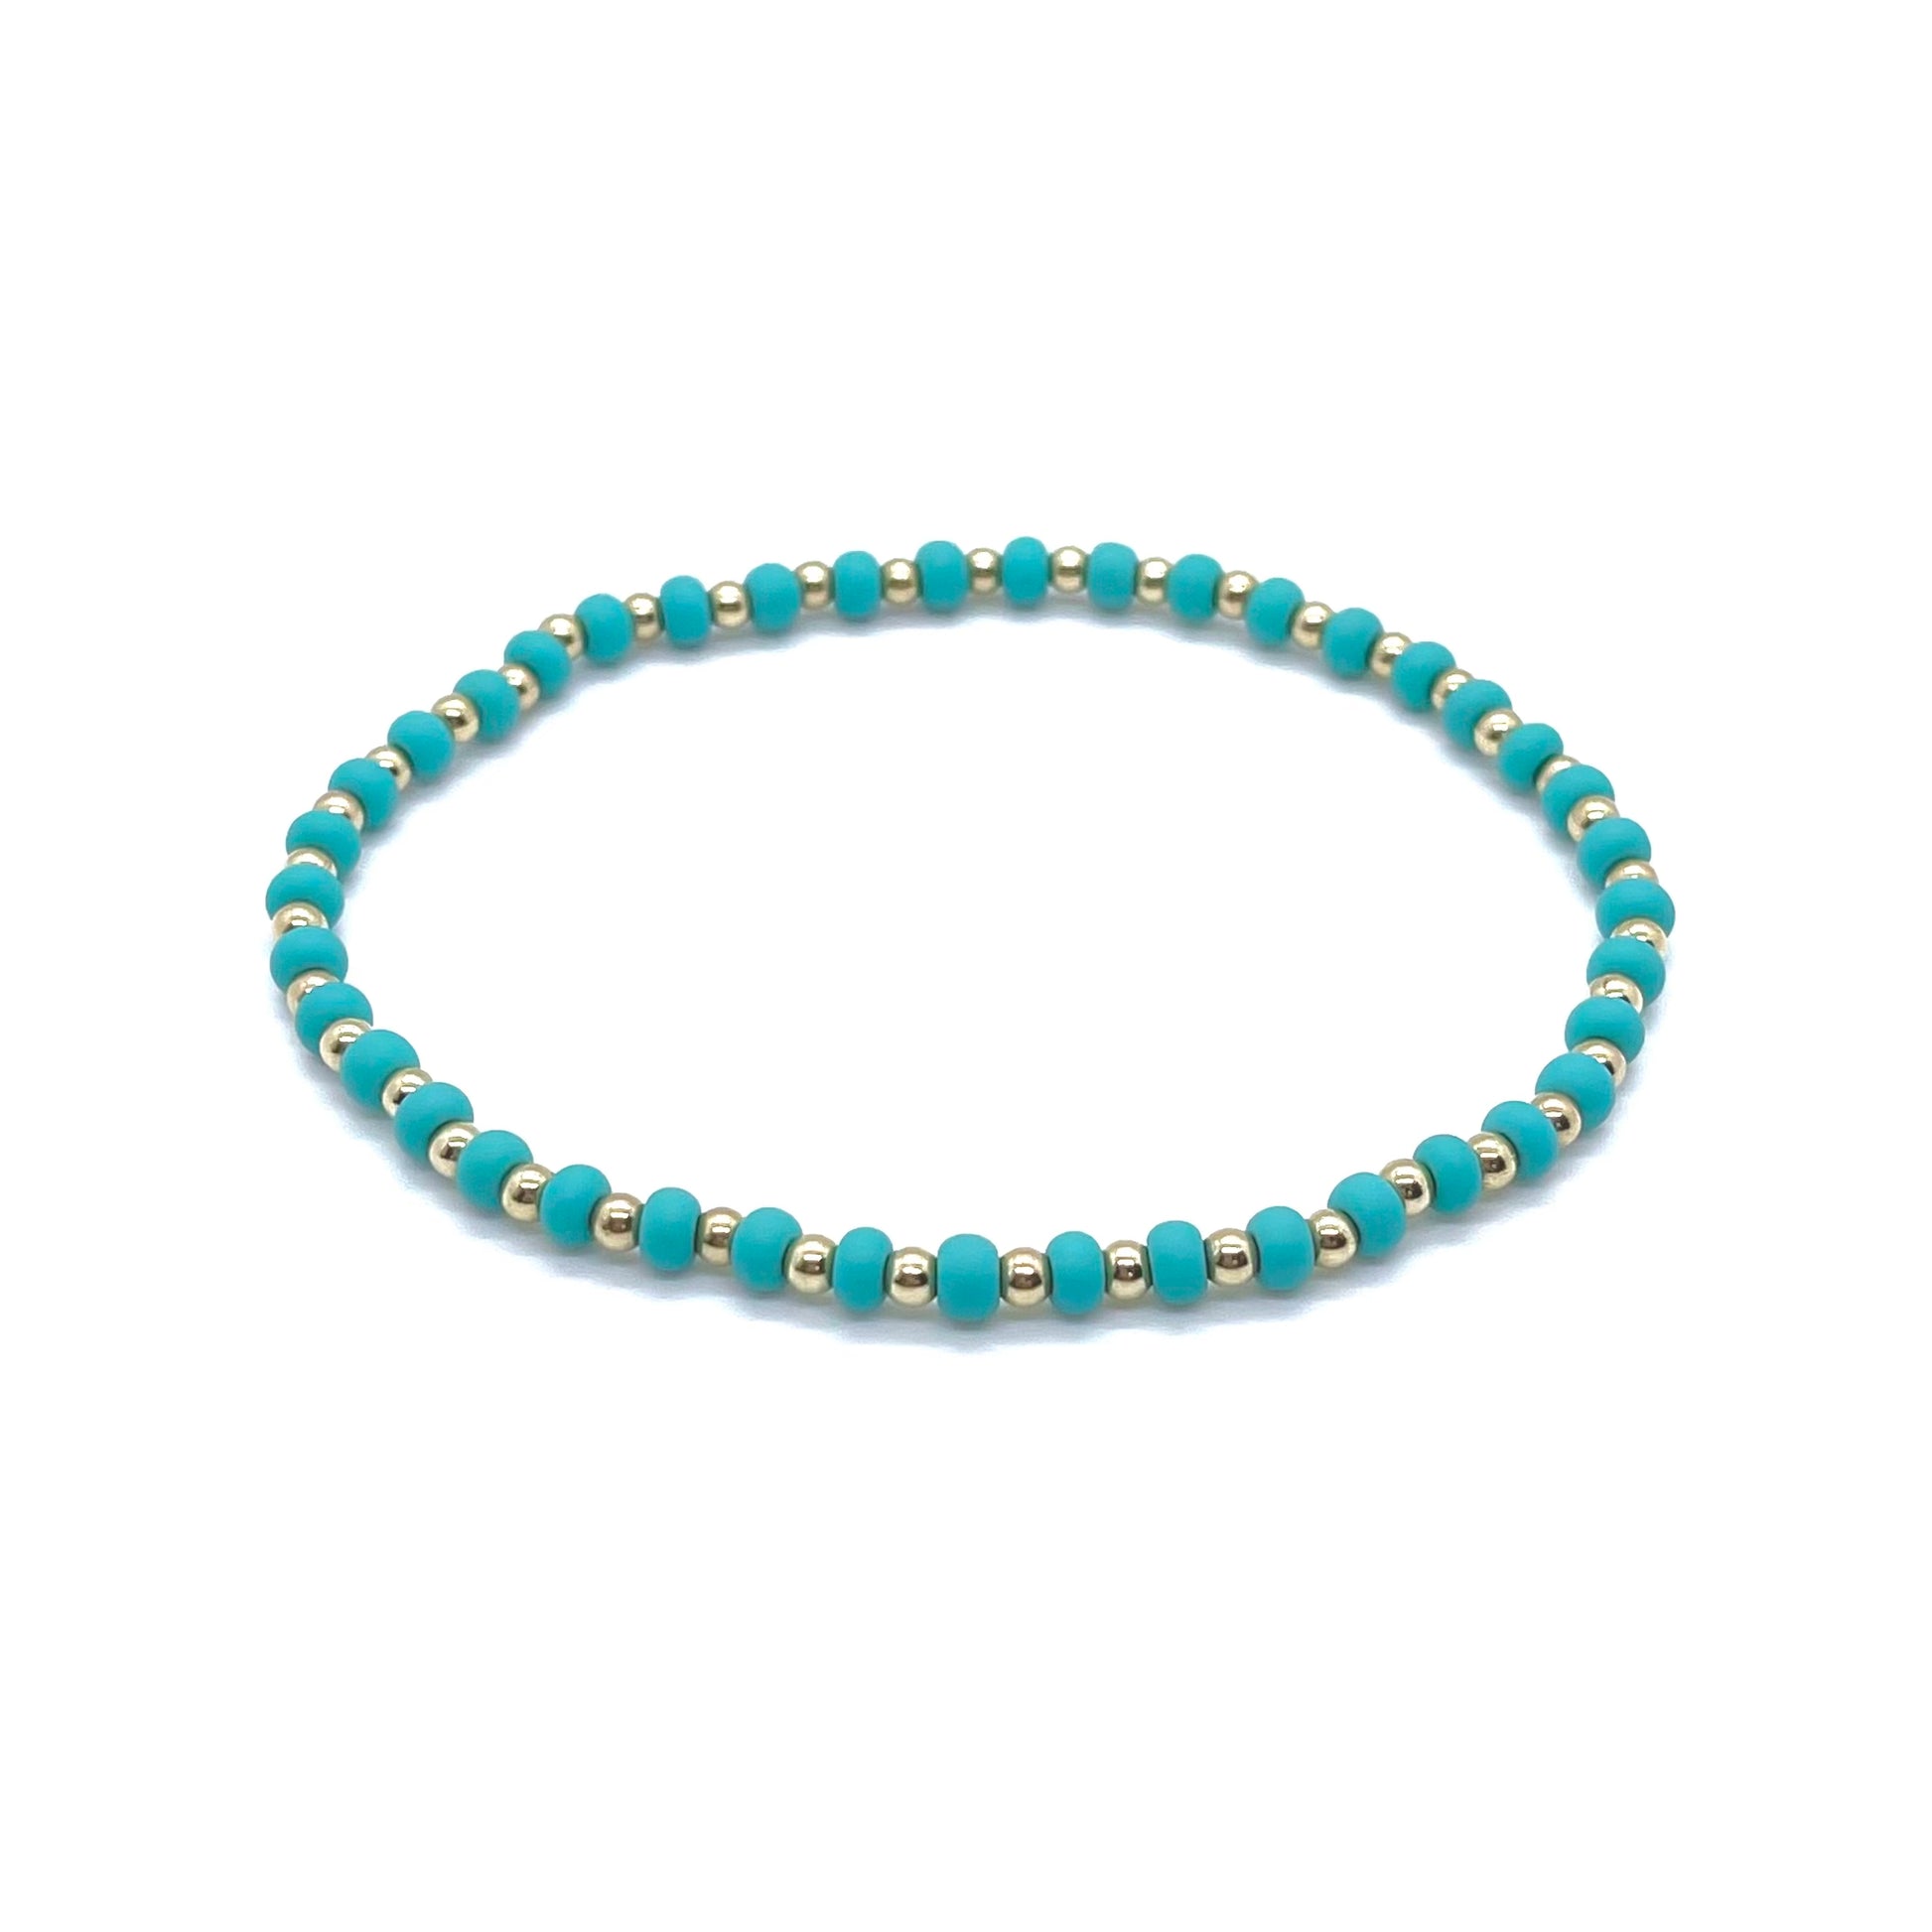 Gold ankle bracelet with 3mm waterproof gold-filled beads and matte aqua green seed beads on elastic stretch cord.